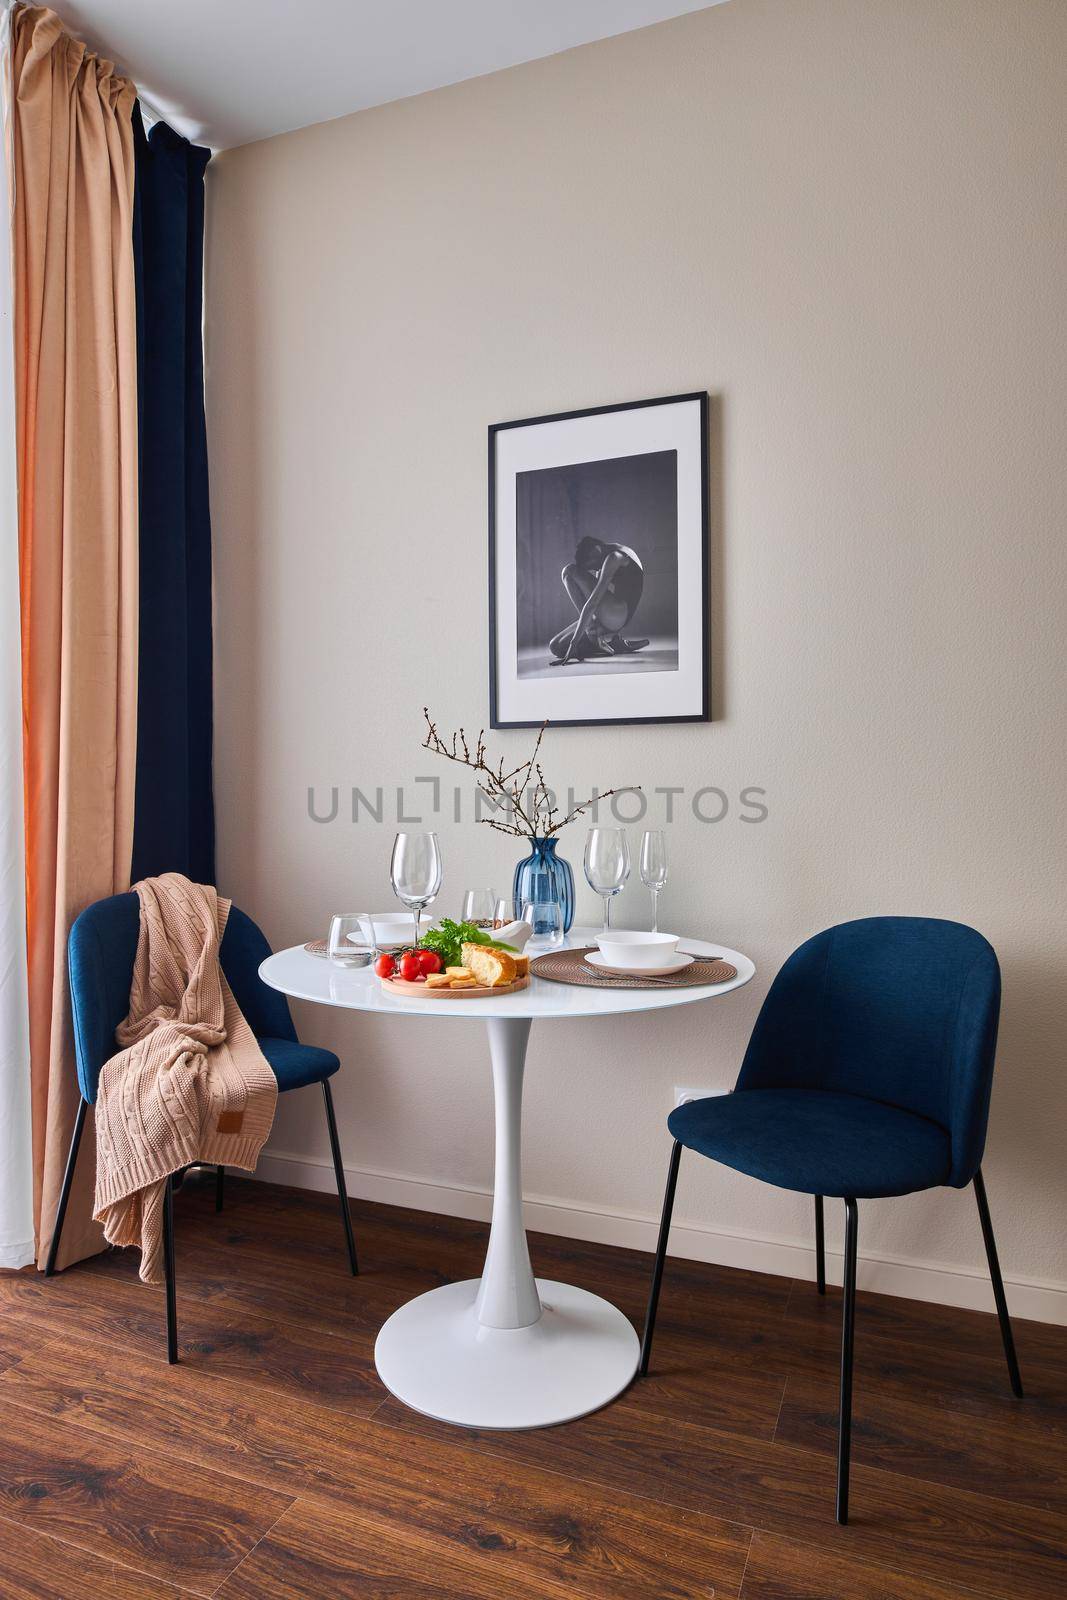 Cozy corner with a table and decor by diczman